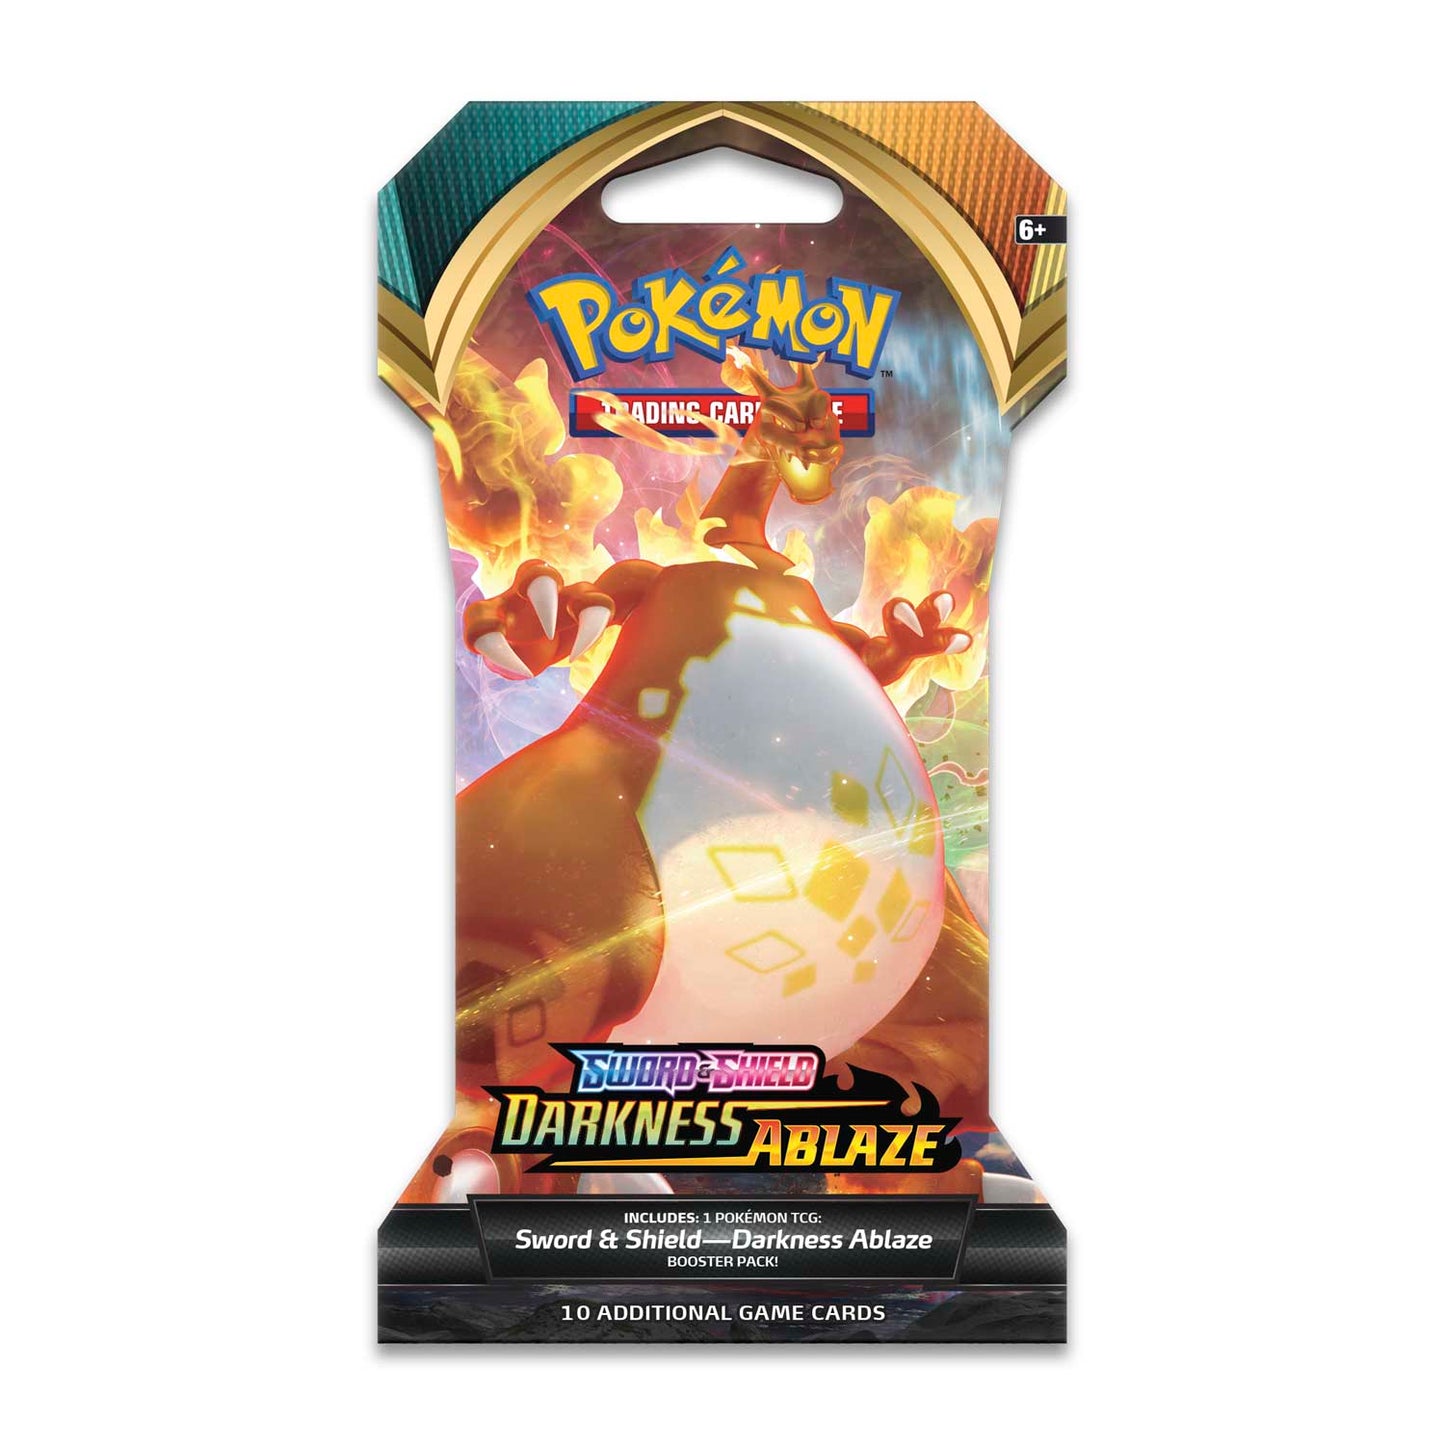 Pokemon Sword and Shield-DARKNESS ABLAZE Booster Pack